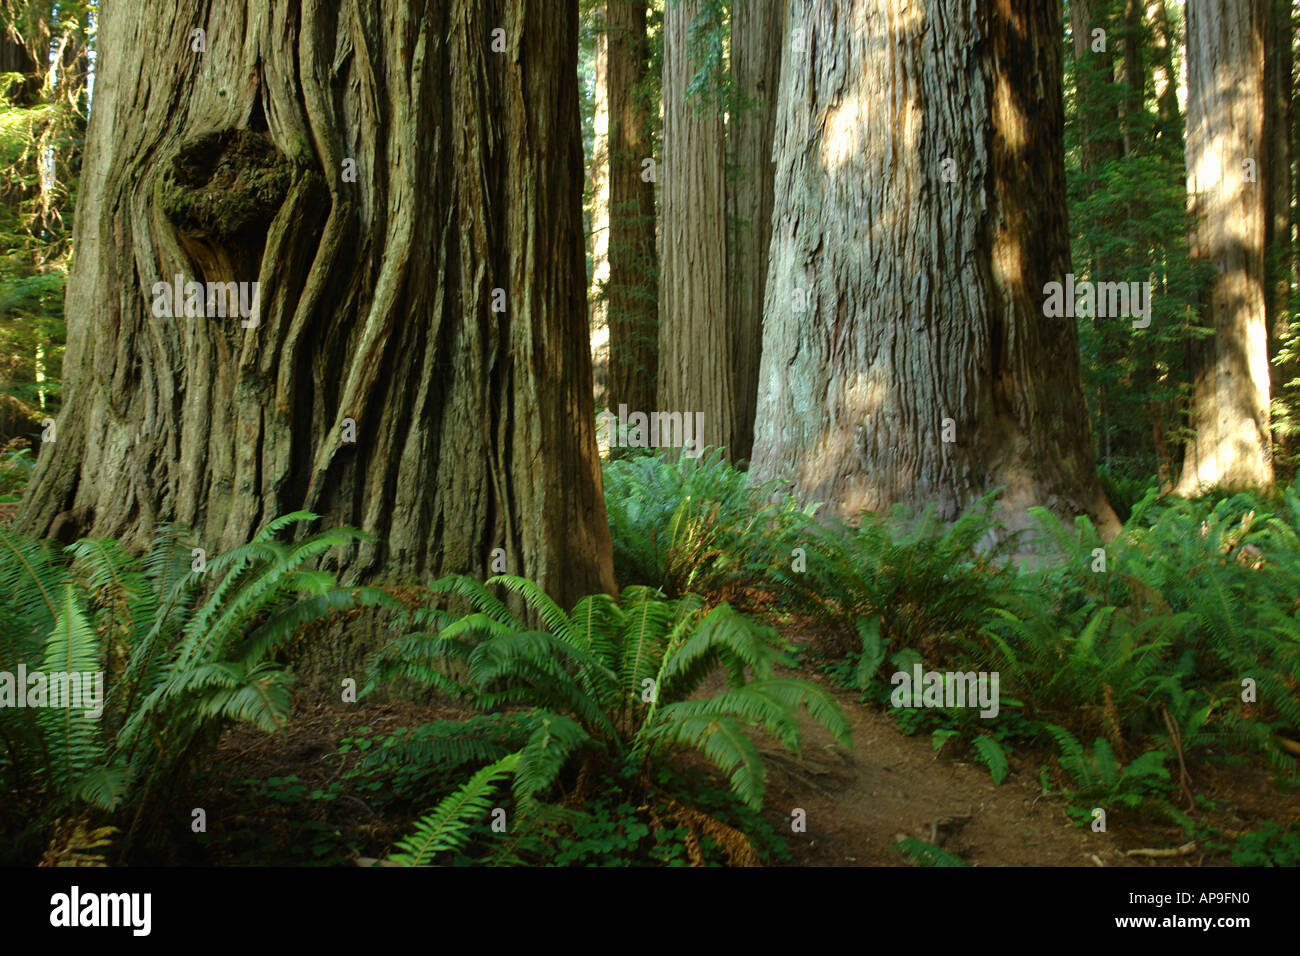 AJD51237, Jedediah Smith Redwoods State Park and Redwood National and State Parks, CA, California, Frank D. Stout Memorial Grove Stock Photo